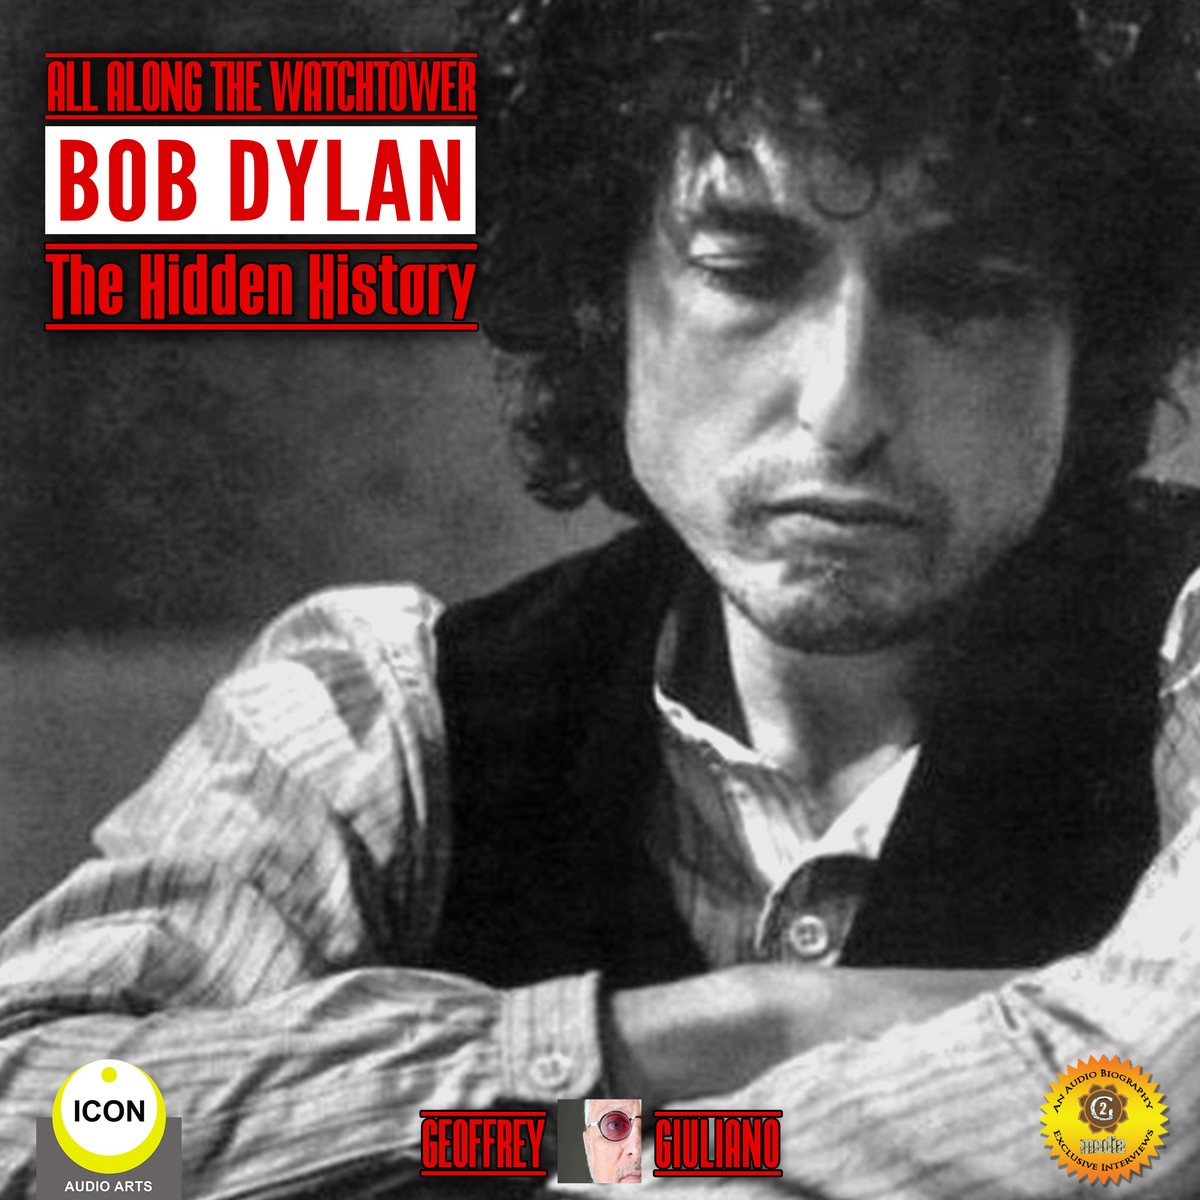 All Along the Watchtower Bob Dylan – The Hidden History